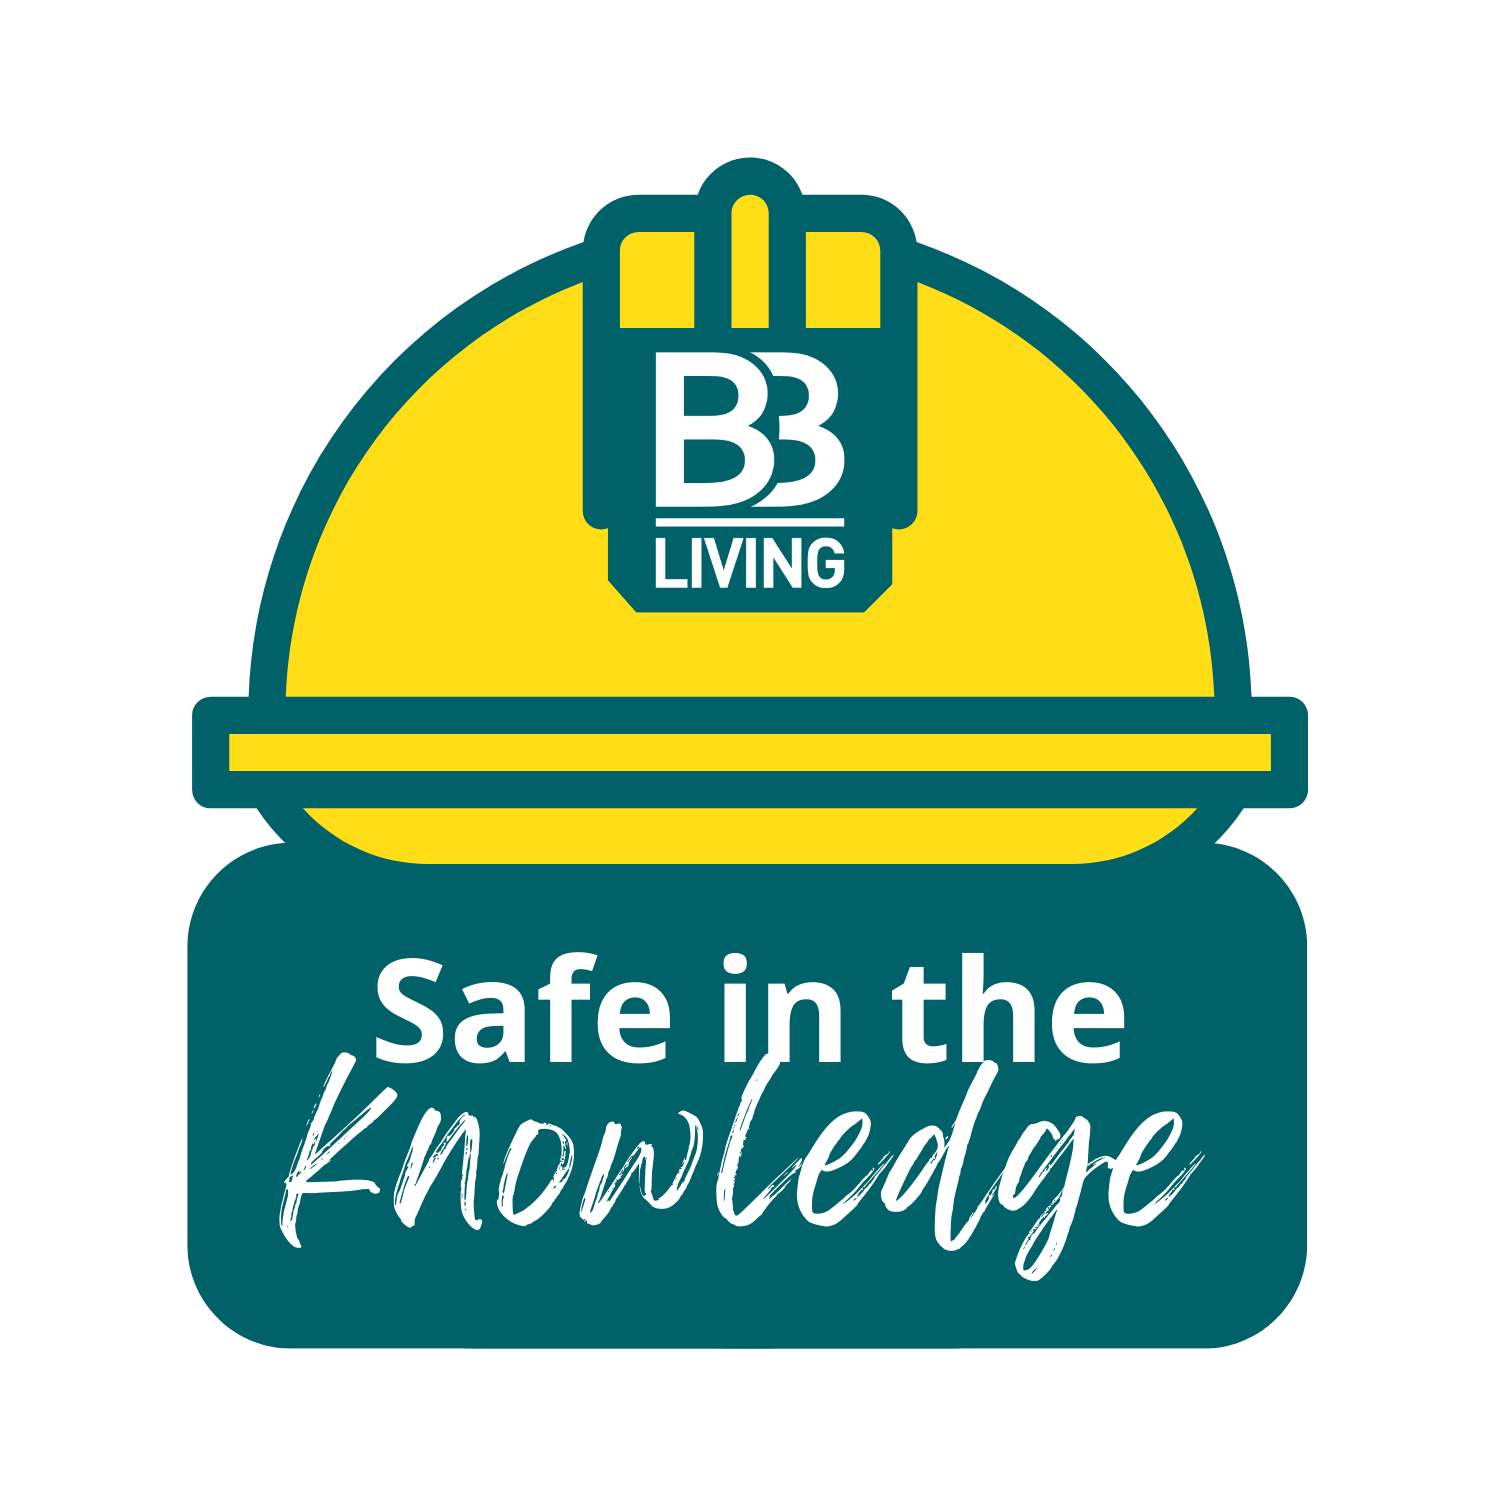 Safe in the knowledge logo